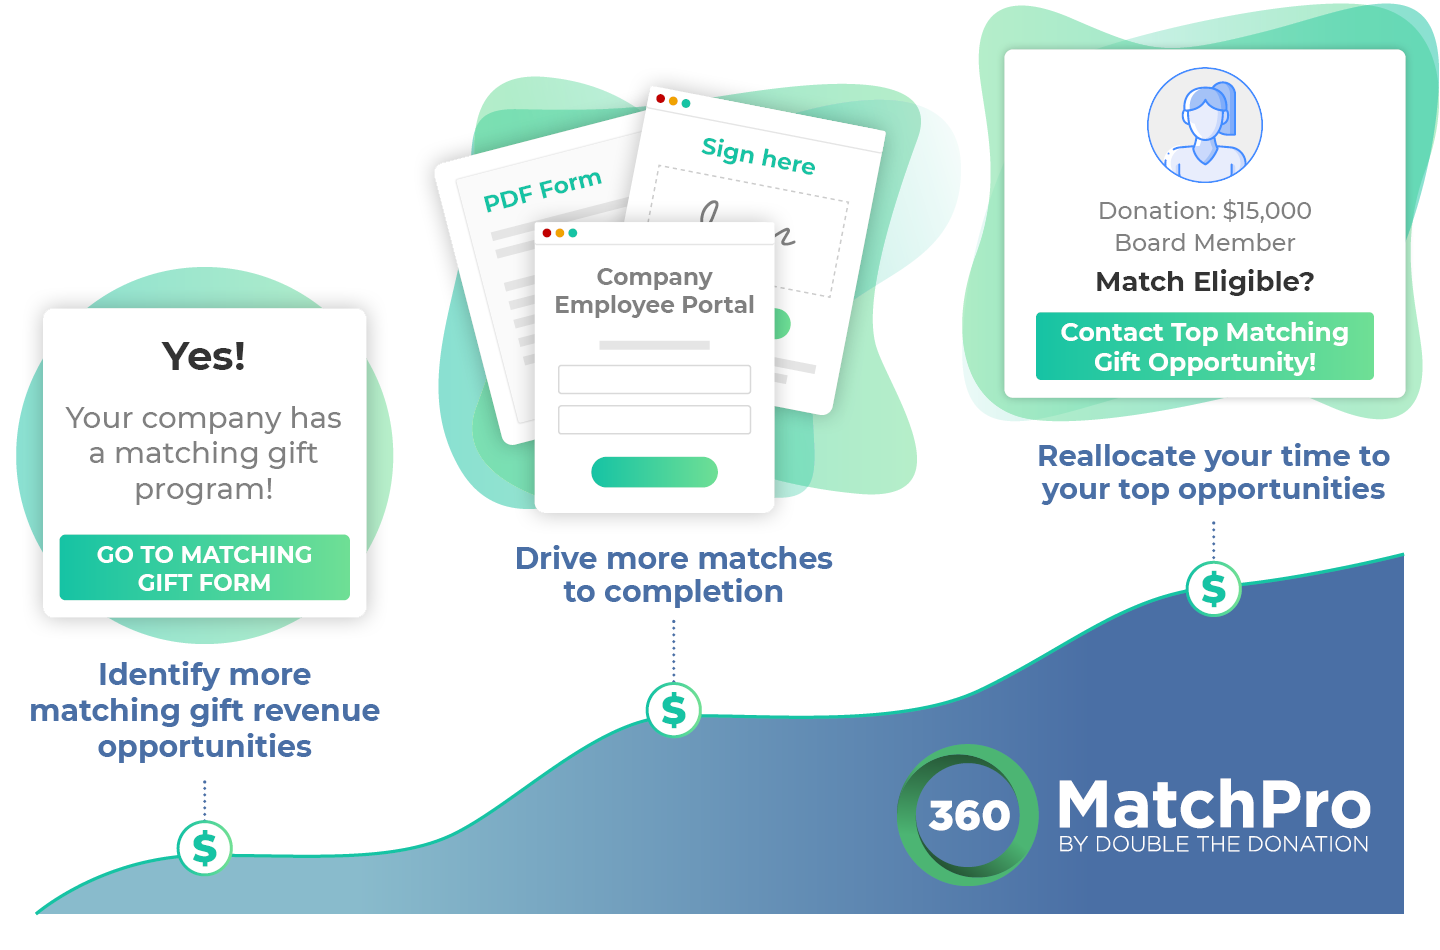 360MatchPro identifies matching opportunities and drives matches to completion so that you can reallocate time to your top priorities.